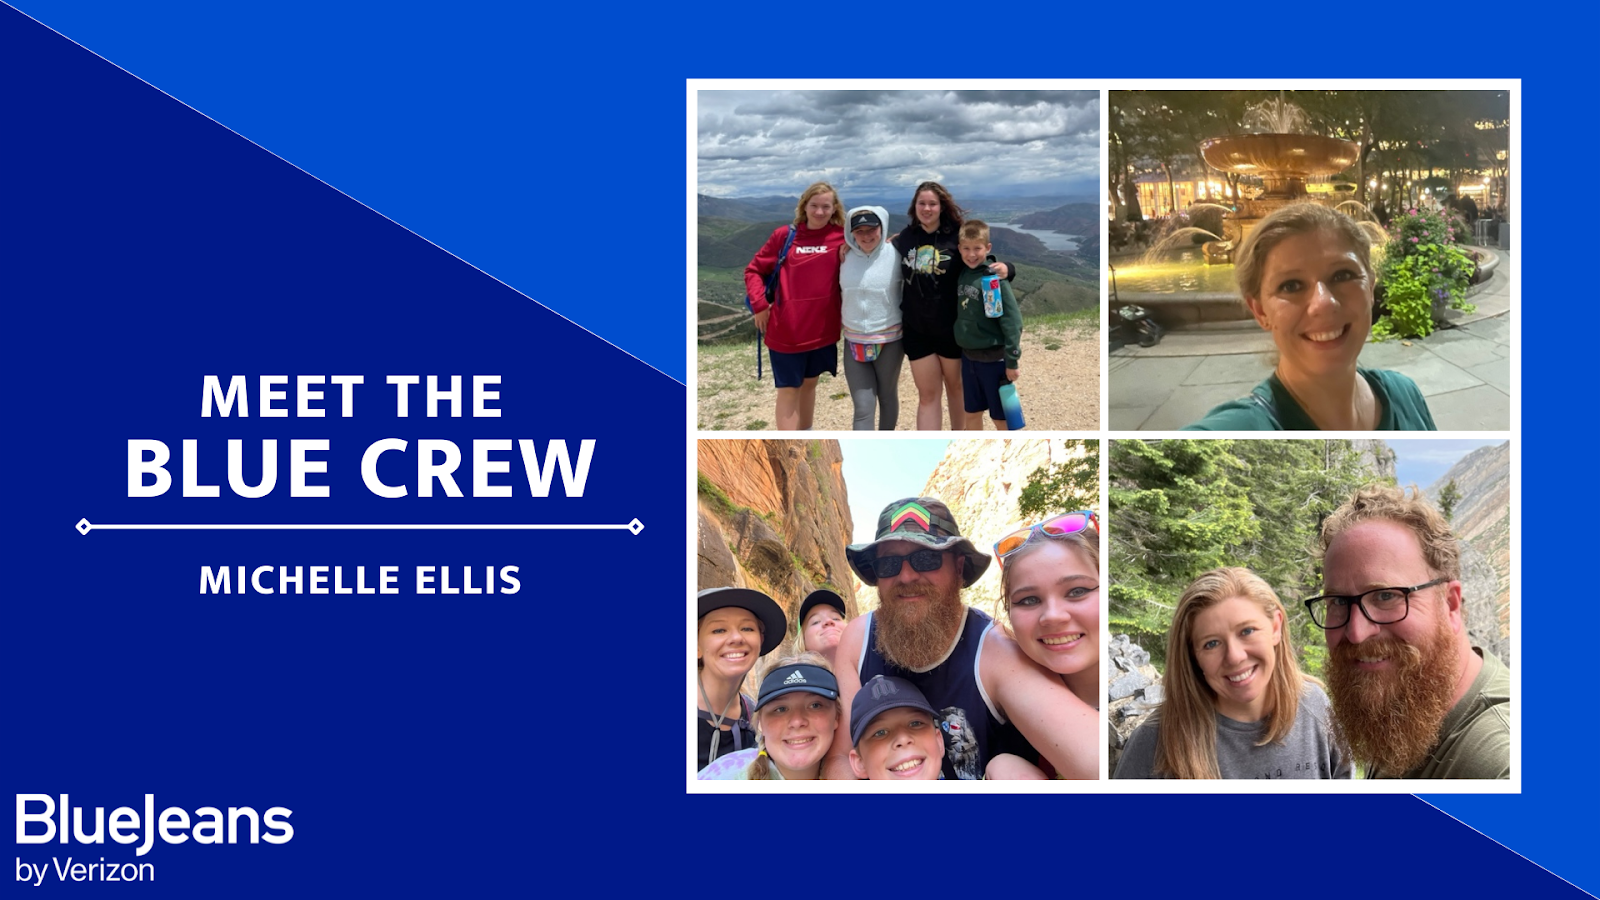 Image: Michelle Ellis and her adventurous family!